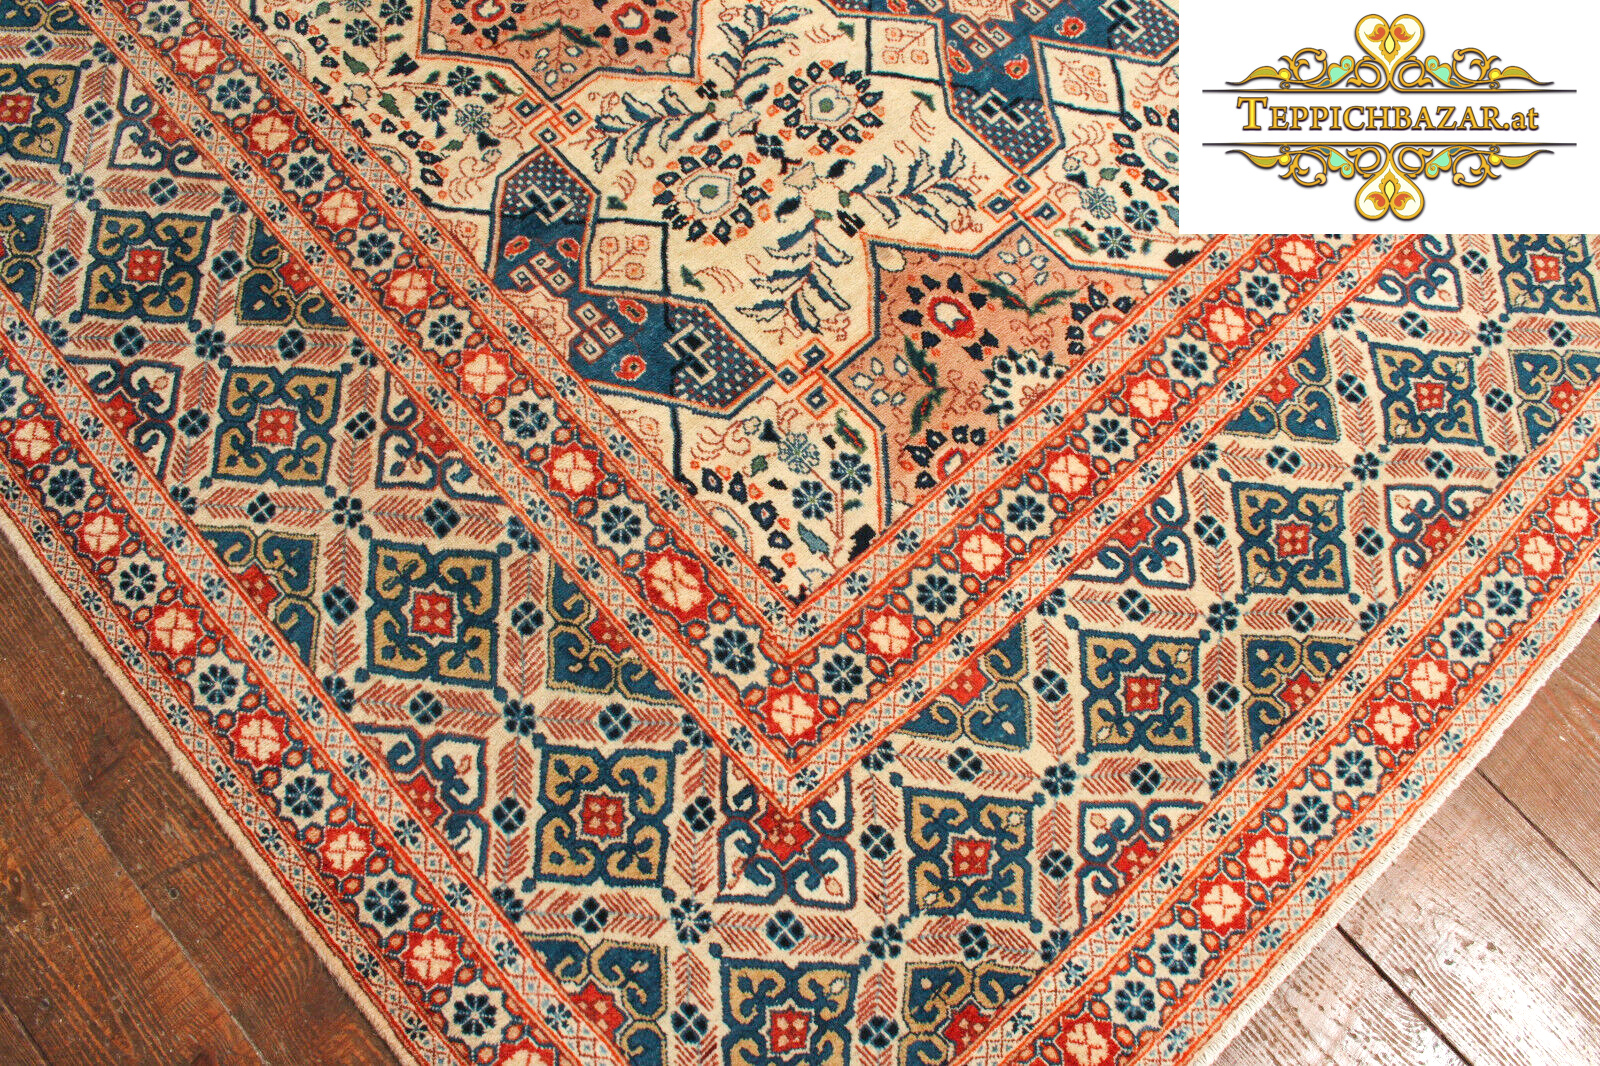 (#H1327) APPROX. 392X297CM HAND-KNOTTED PERSIAN RUG PERSIAN RUG,,WOOL,ORIENTAL RUG,CARPET BAZAR,CARPET,RUGS,PATTERNS,BRICKLER,ORIENTAL RUG TYPE: PERSIAN RUG WITH SIGNATURE PILE: 100% WOOL WITHOUT ADDITIONS WARP: 100% COTTON SIZE: 392 297X160.000CM NODE COUNT: APPROX. XNUMX KNOTS PER M² CONDITION: VERY GOOD WITH PATINA PERSIAN CARPET ORIENTAL CARPET